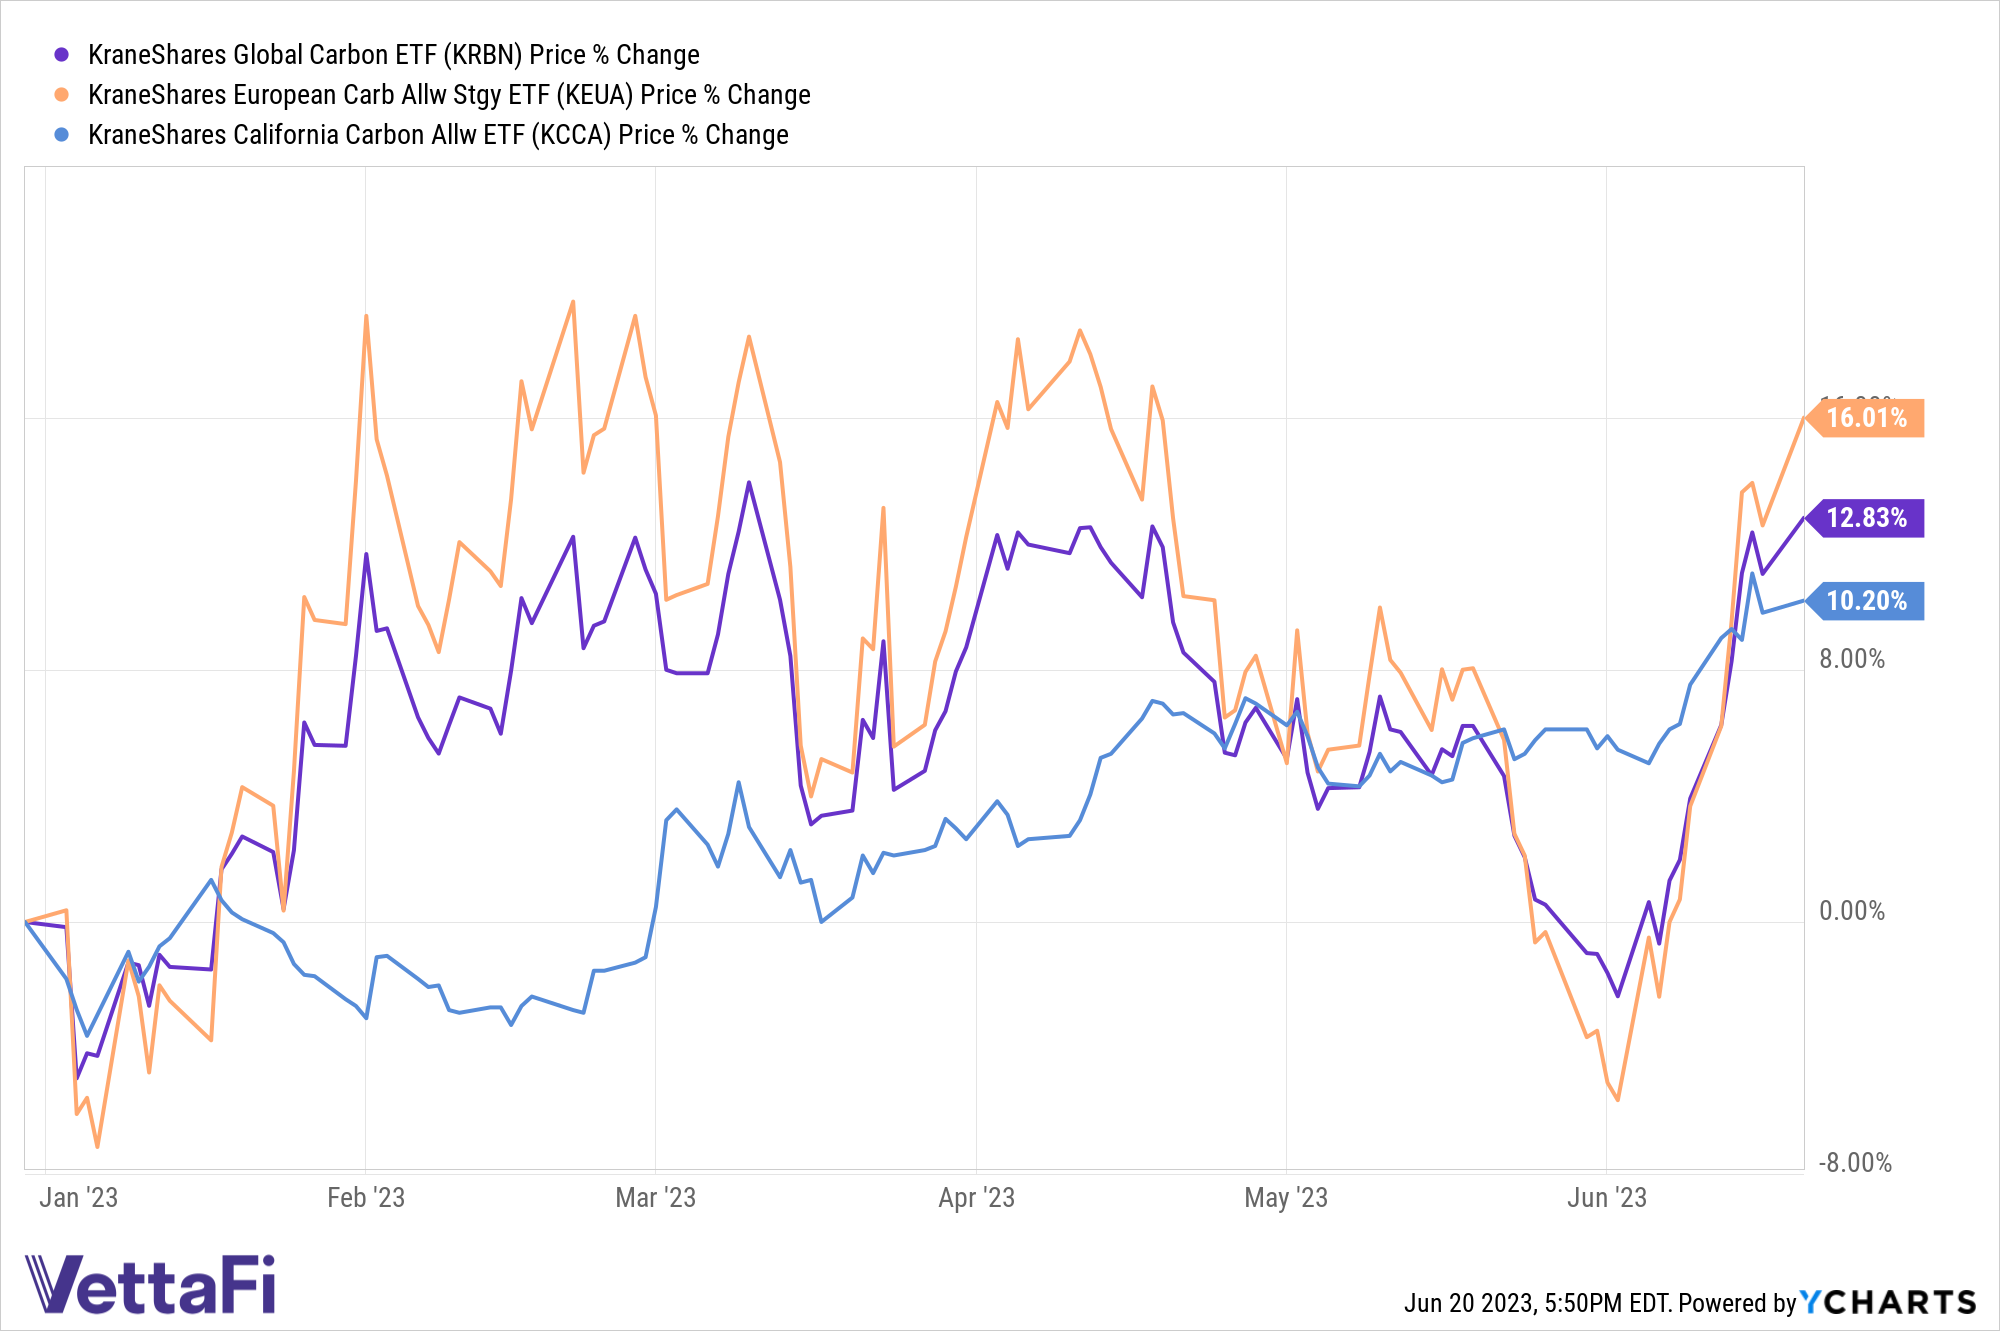 Chart of price returns YTD for KEUA (16.01%), KRBN (12.83%), and KCCA (10.20%)